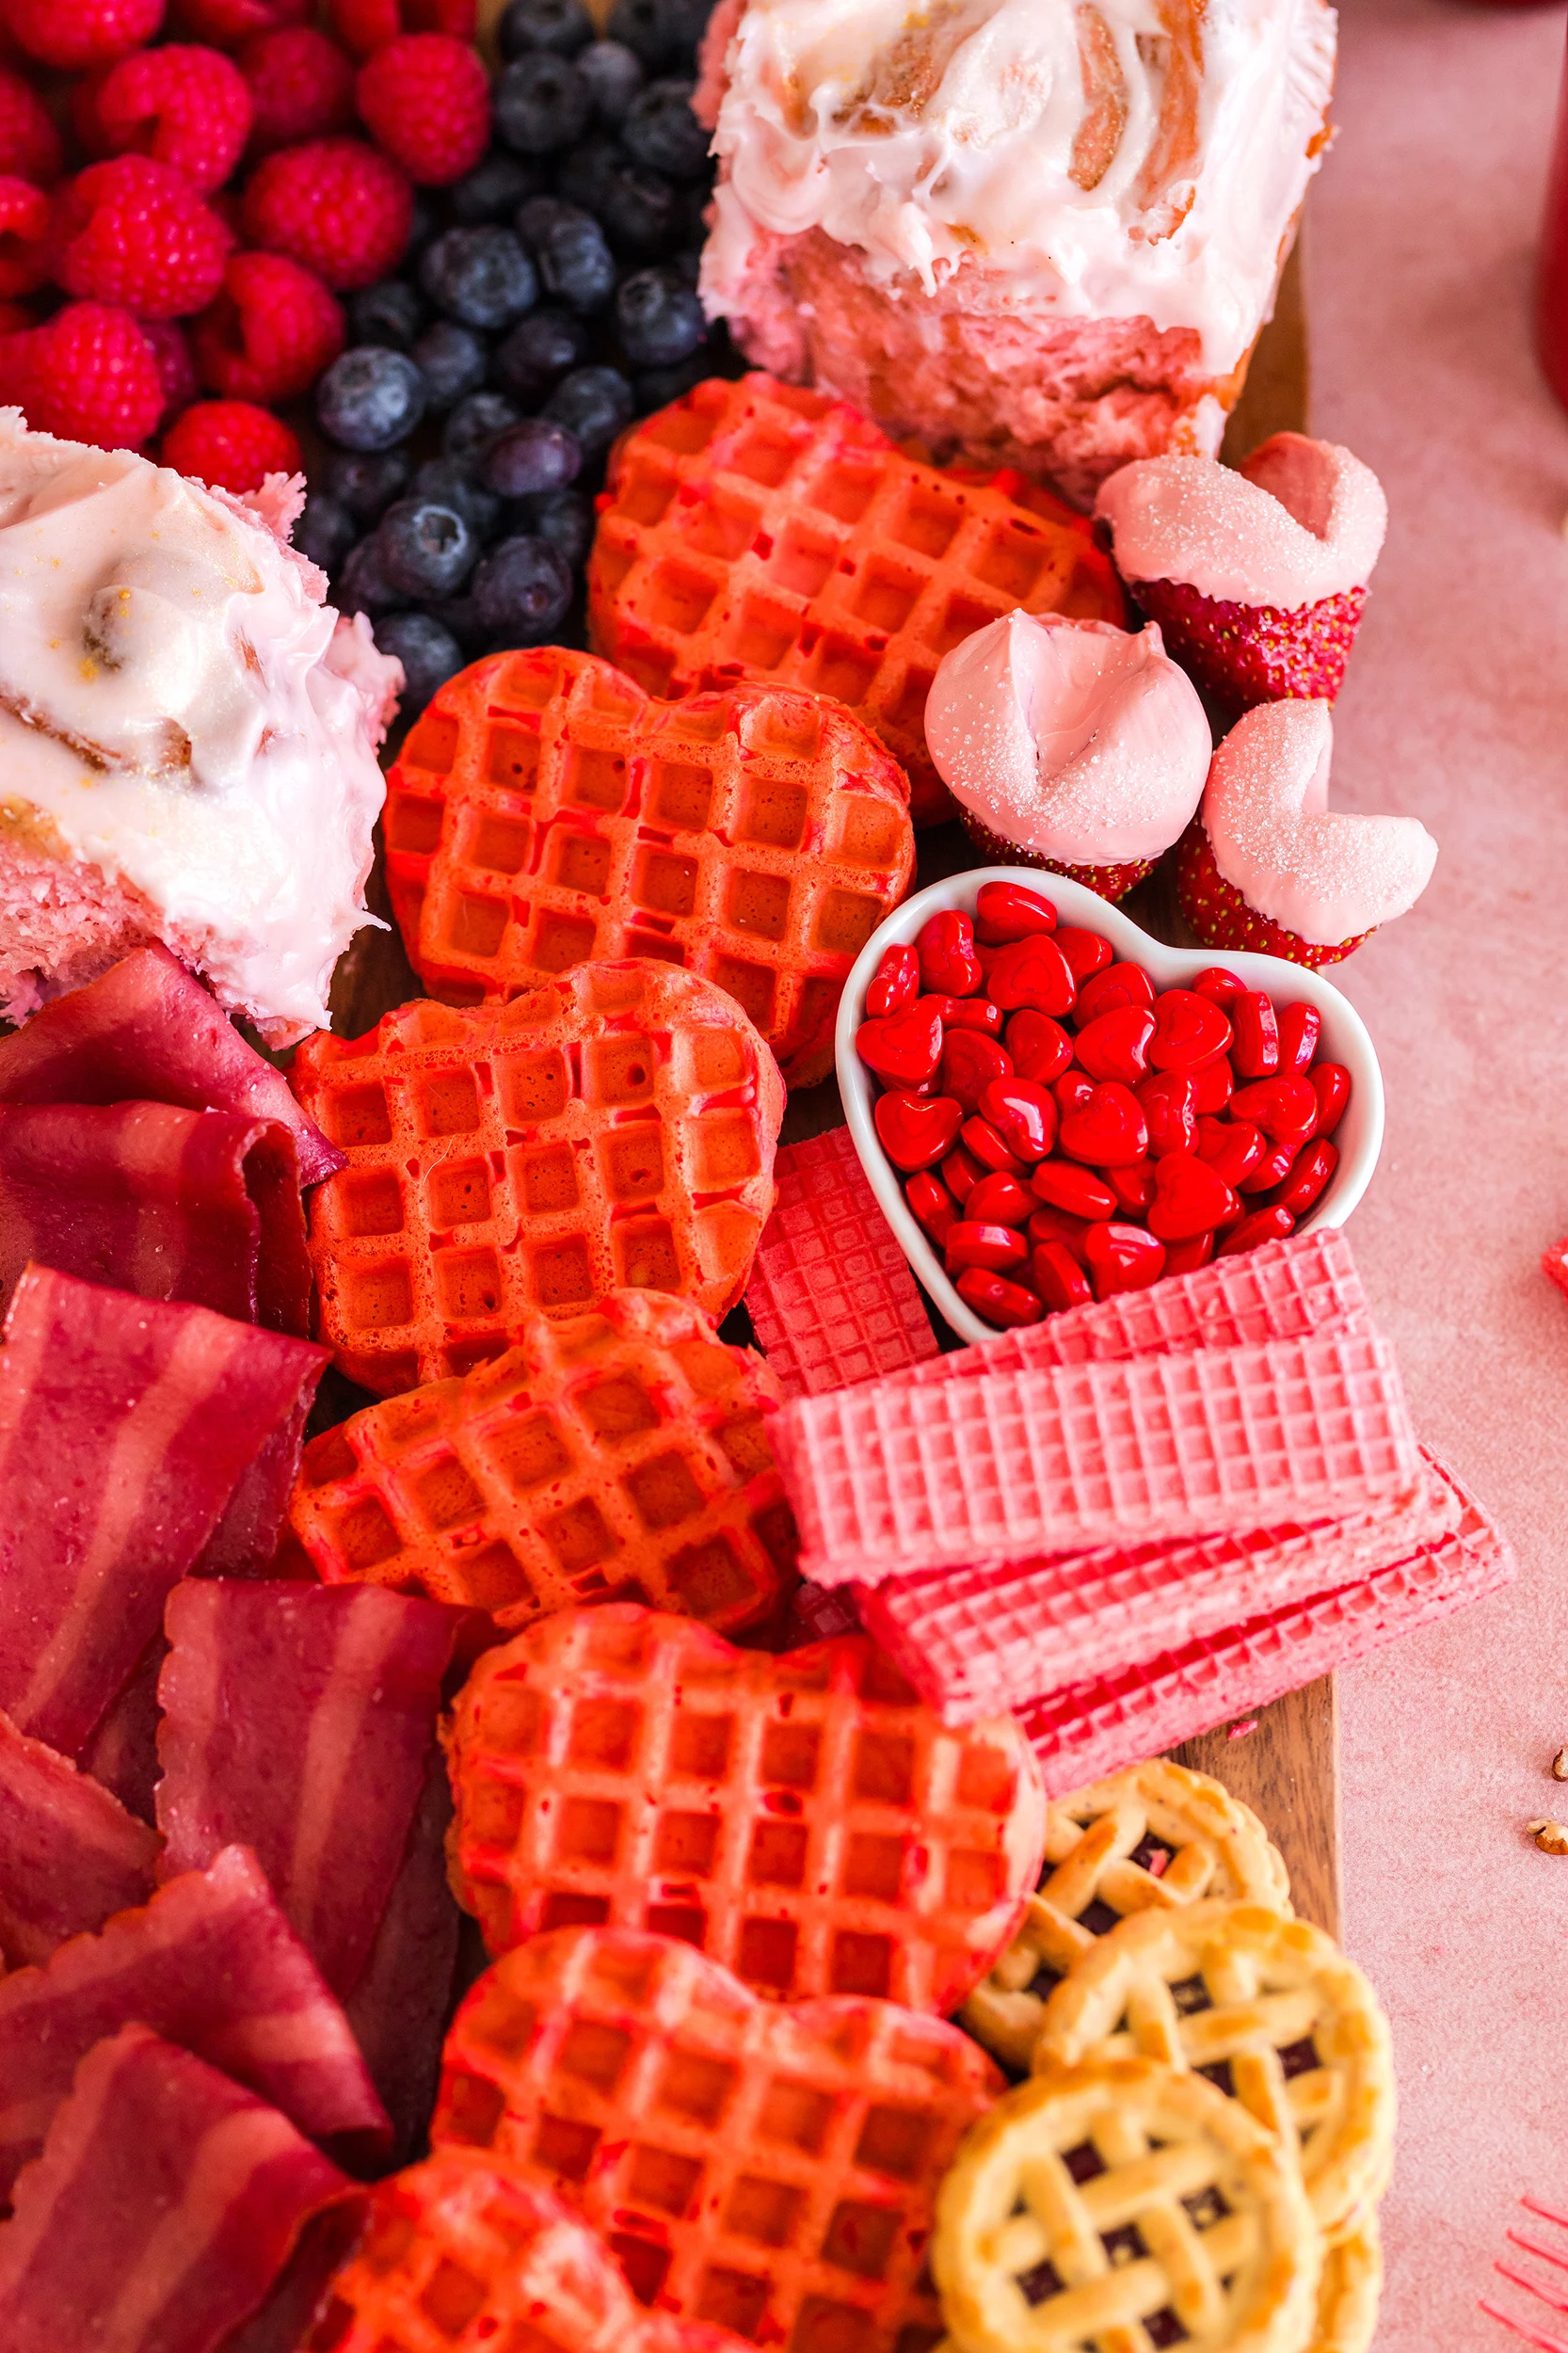 cândy hearts, pink wafer cookies and Lindzer cookies on a charcuterie board